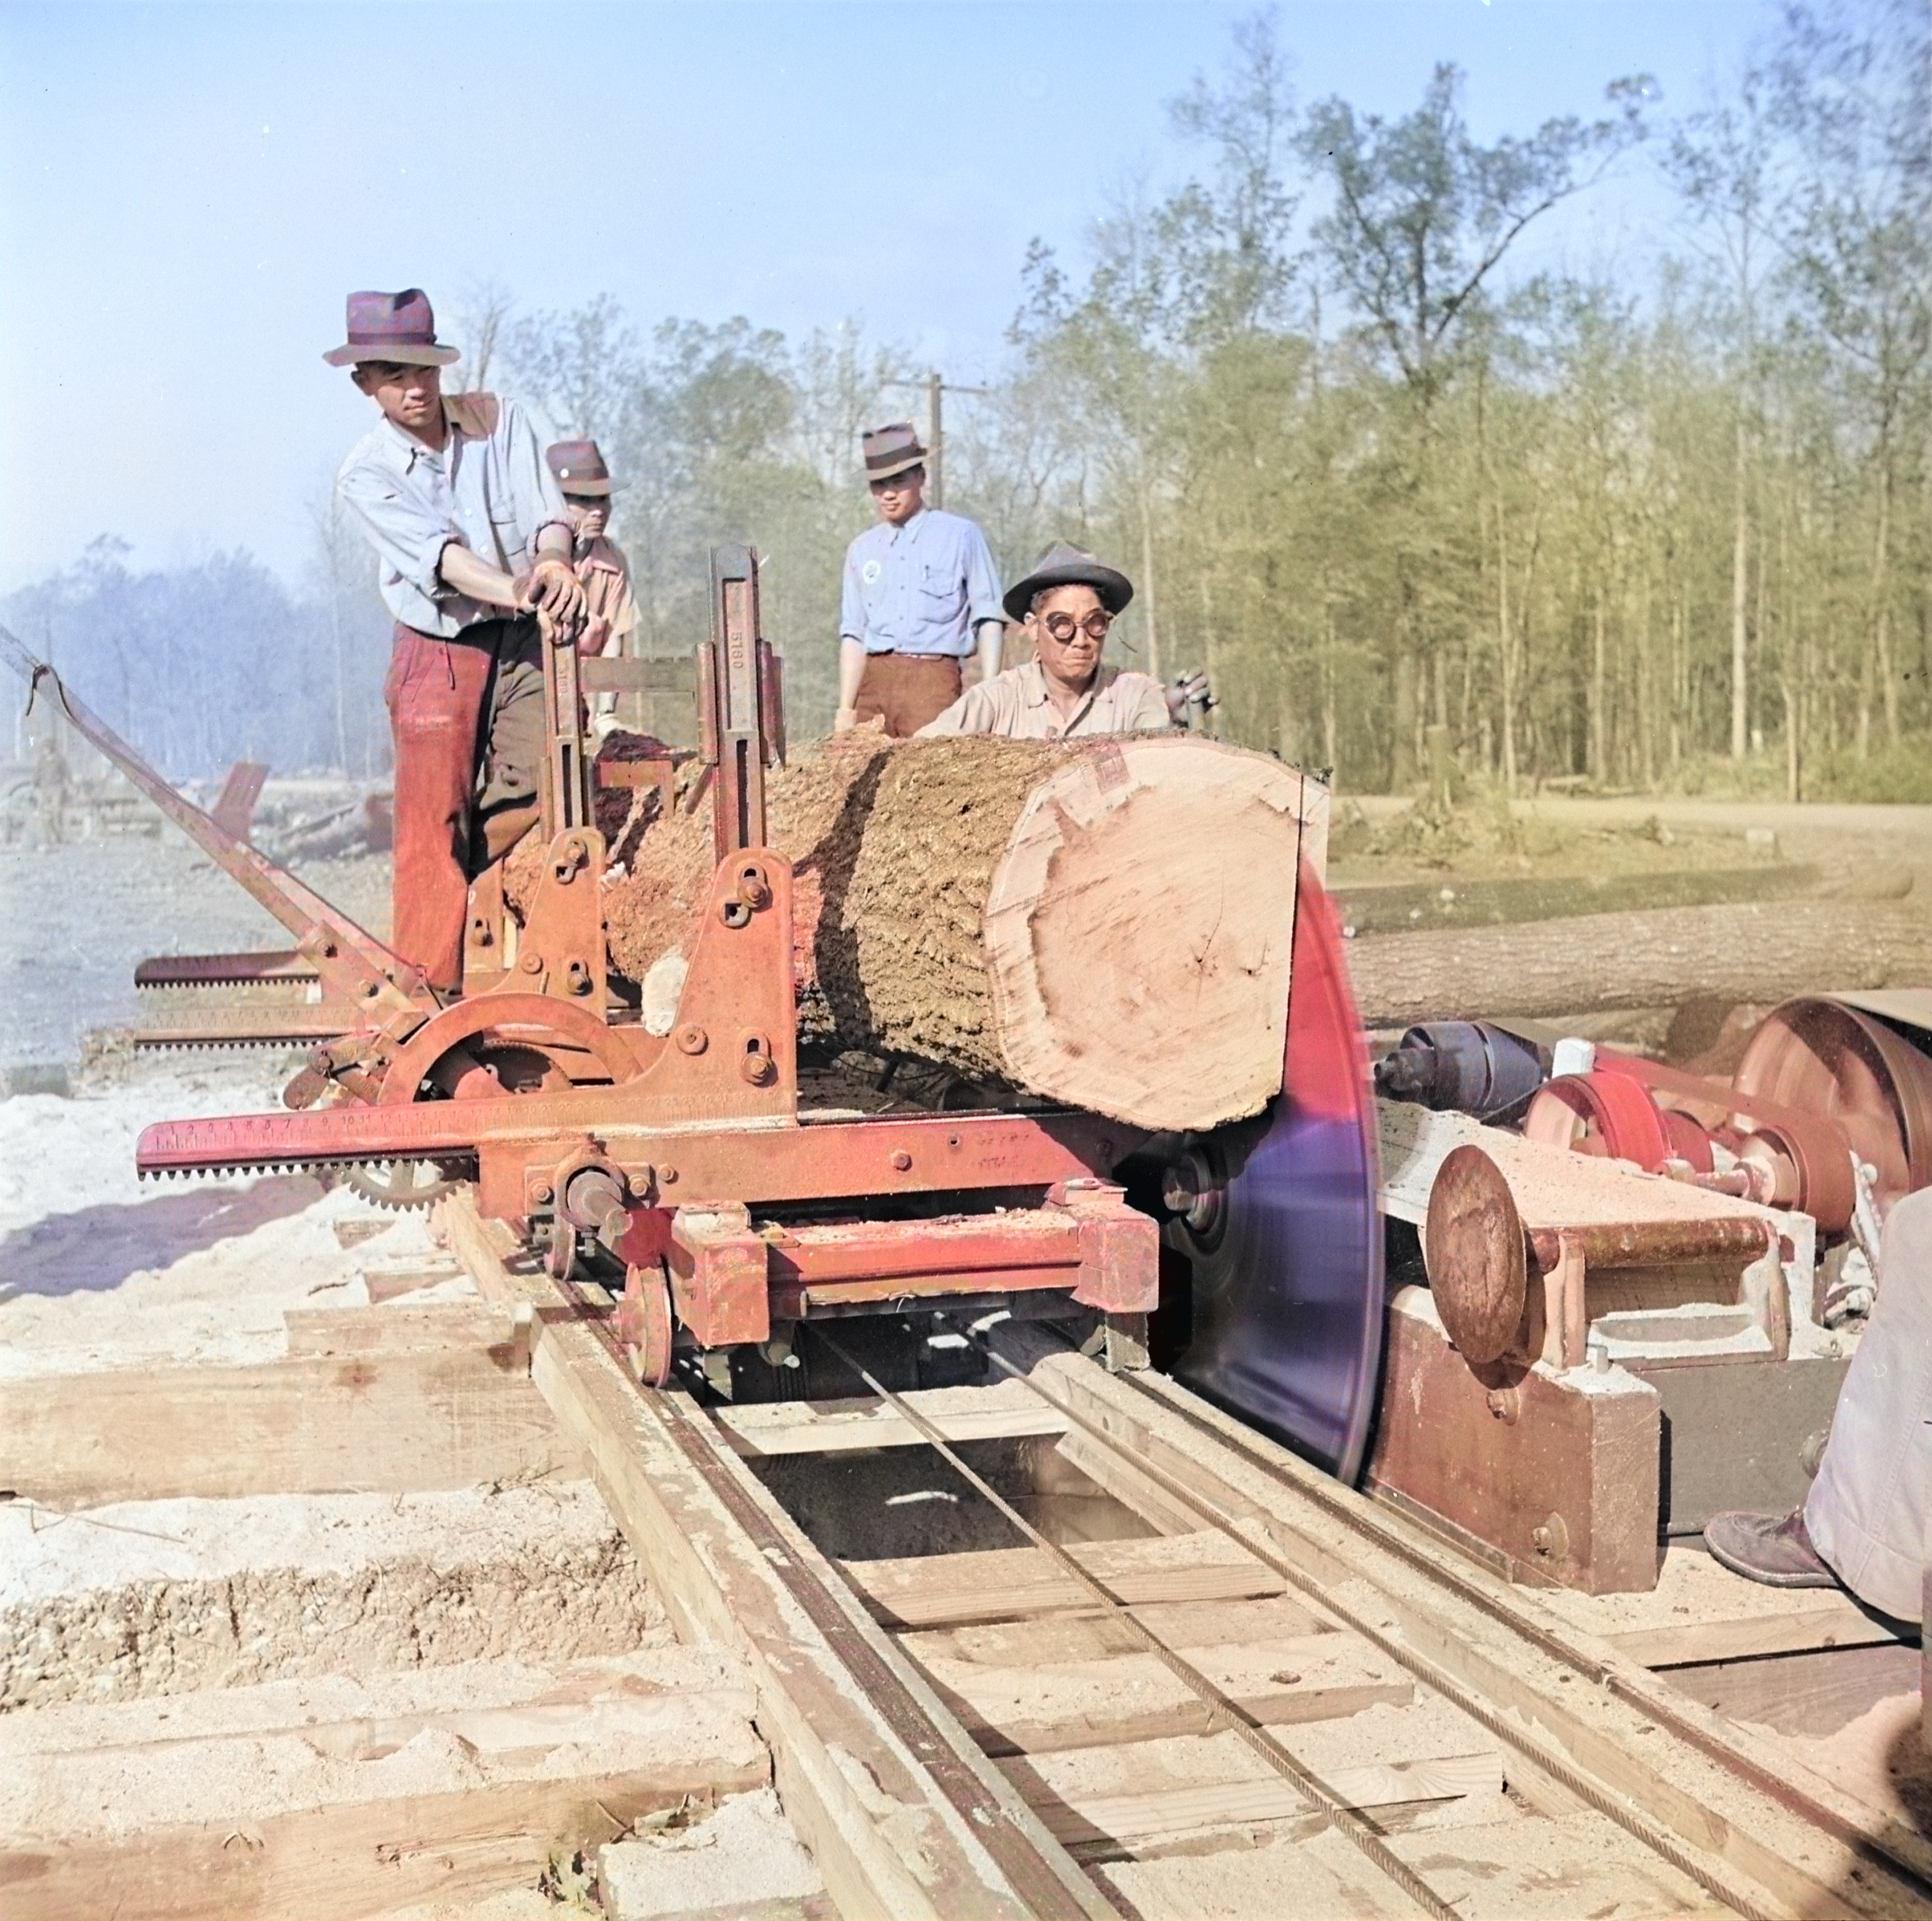 Men working at a saw mill, Jerome War Relocation Center, Arkansas, United States, 16 Nov 1942, photo 1 of 2 [Colorized by WW2DB]